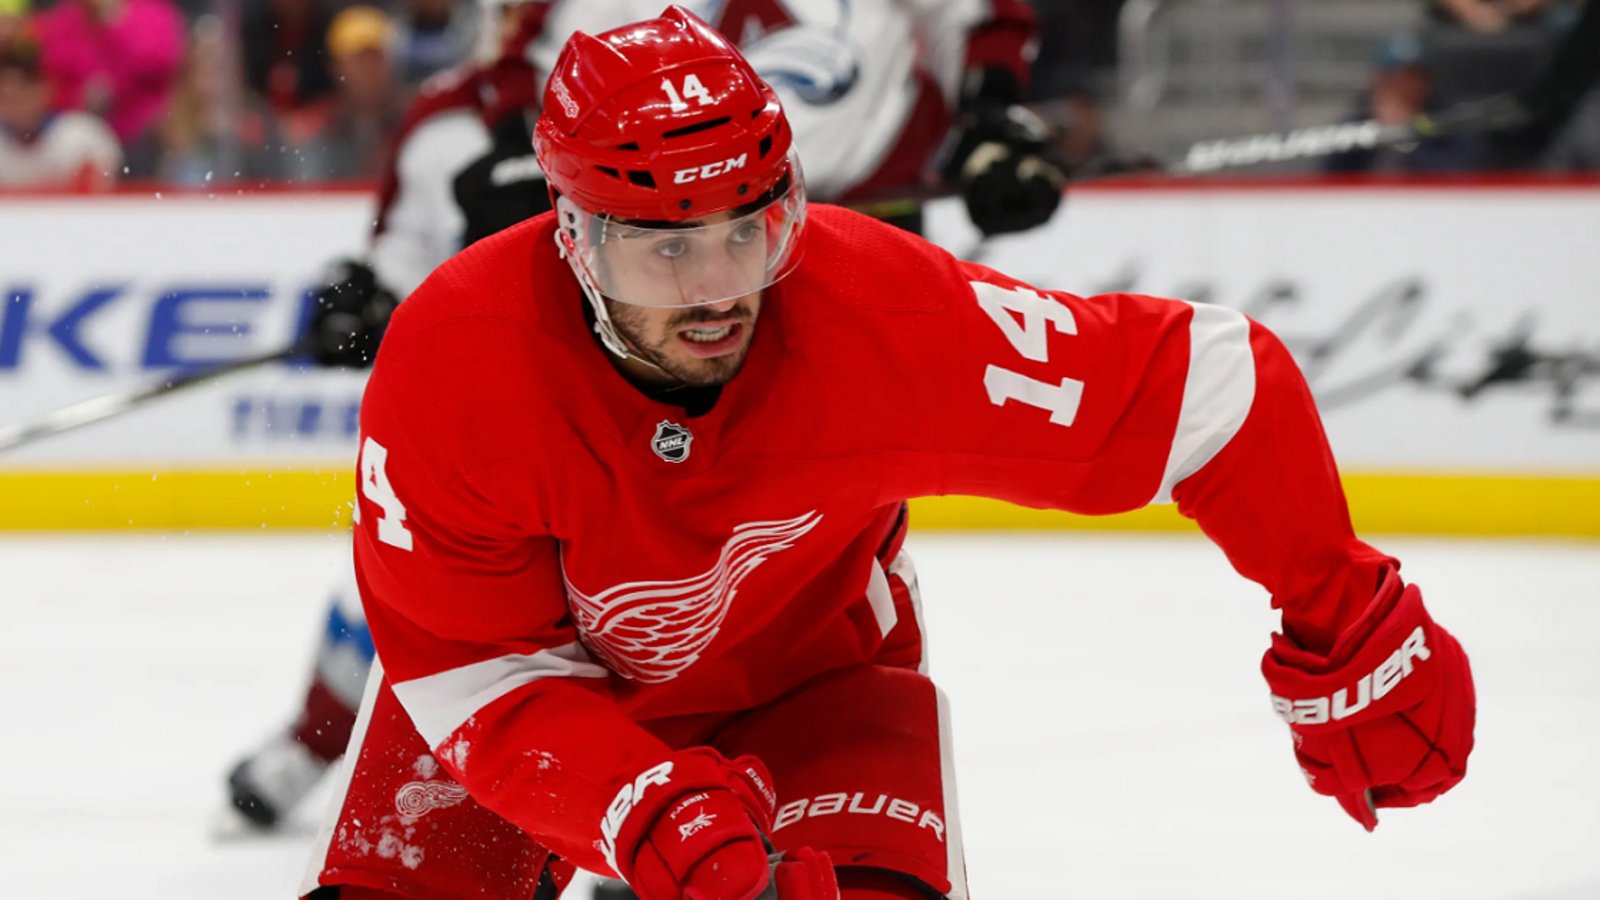 Robby Fabbri missing from Red Wings bench in 2nd period.